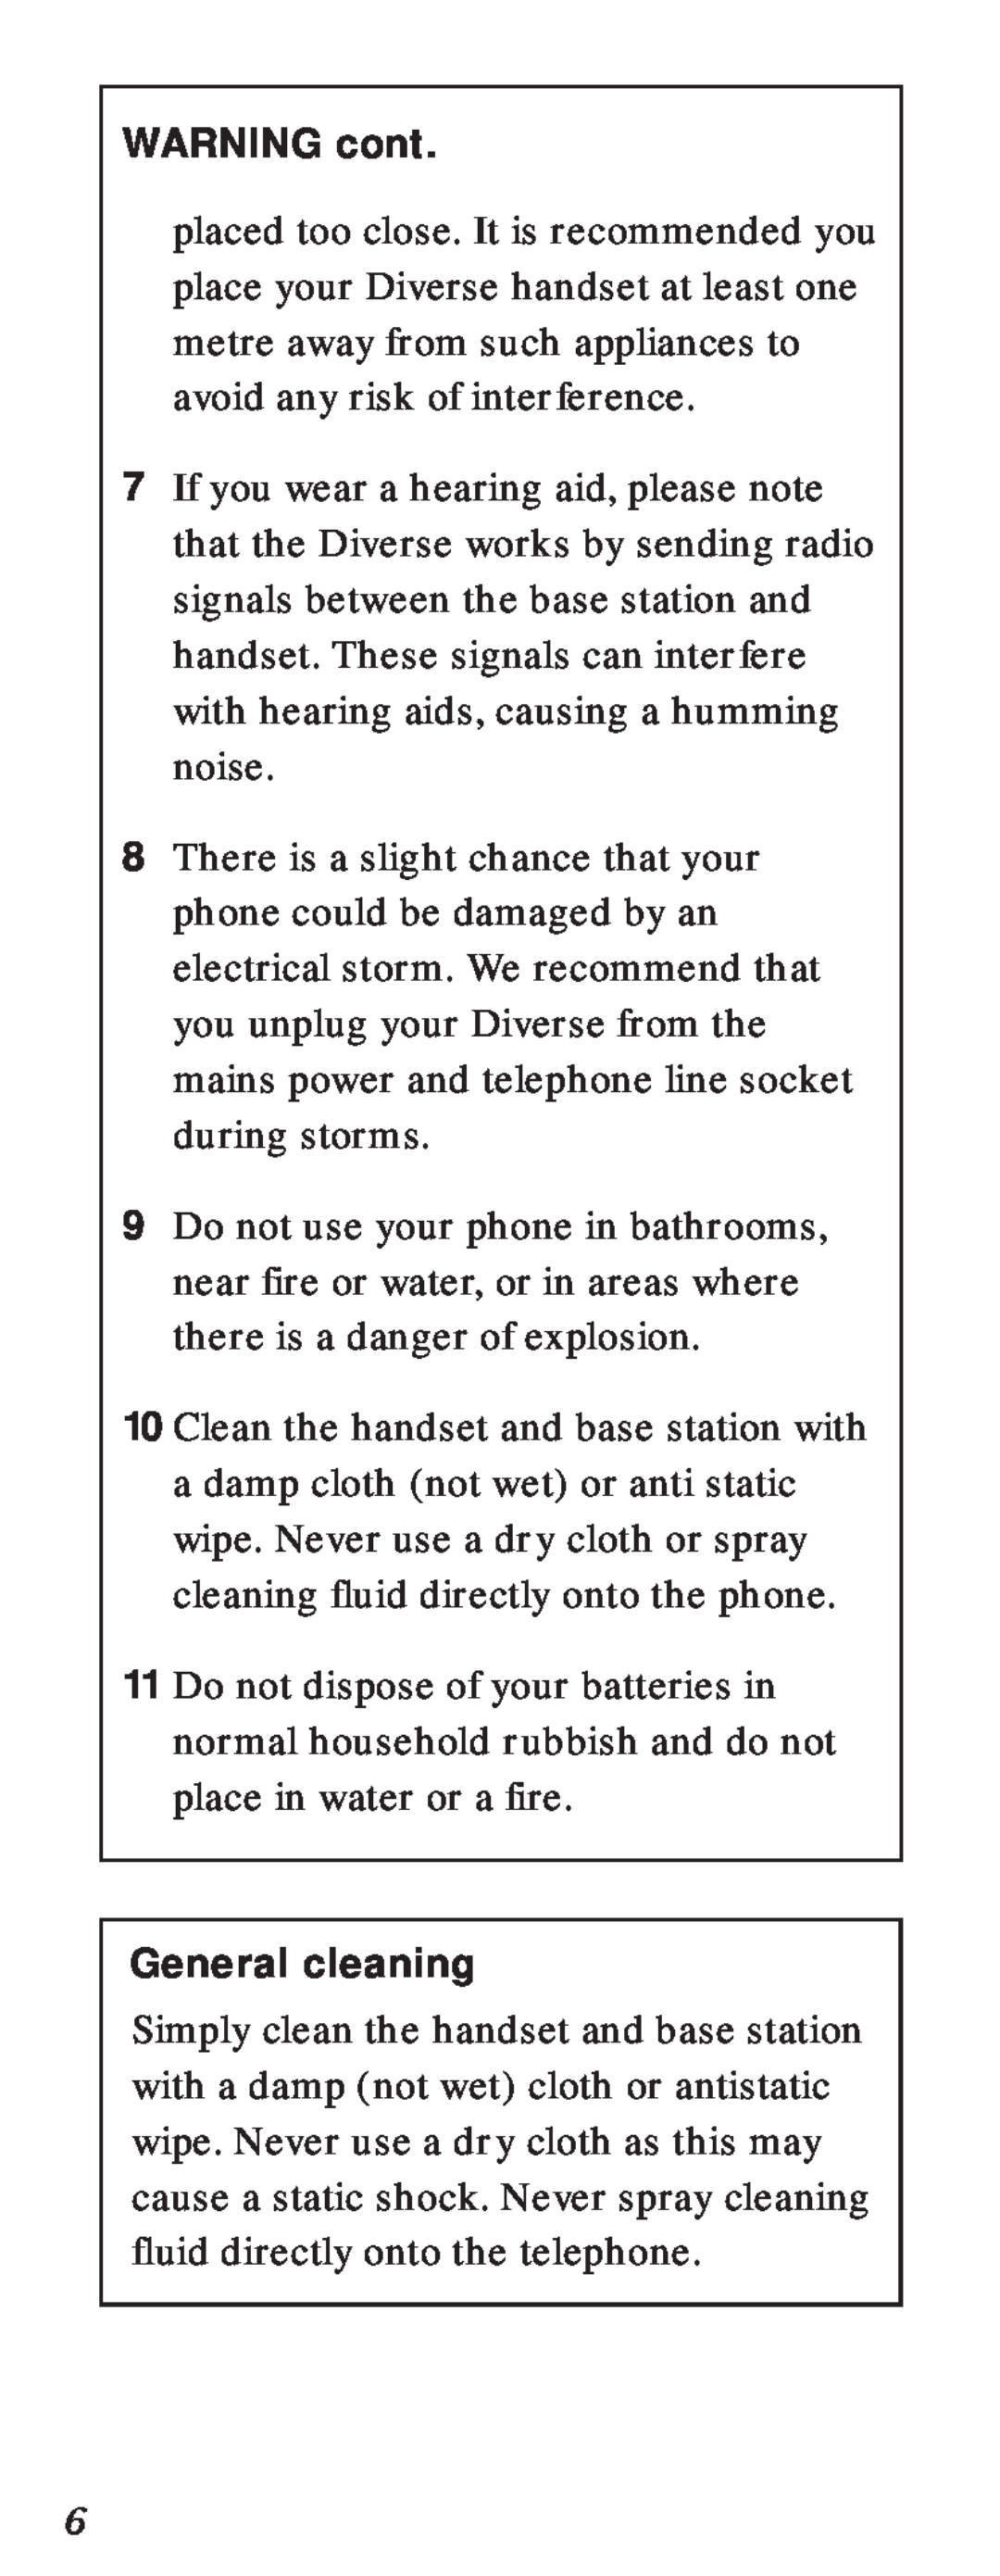 BT 2000 user manual WARNING cont, General cleaning 